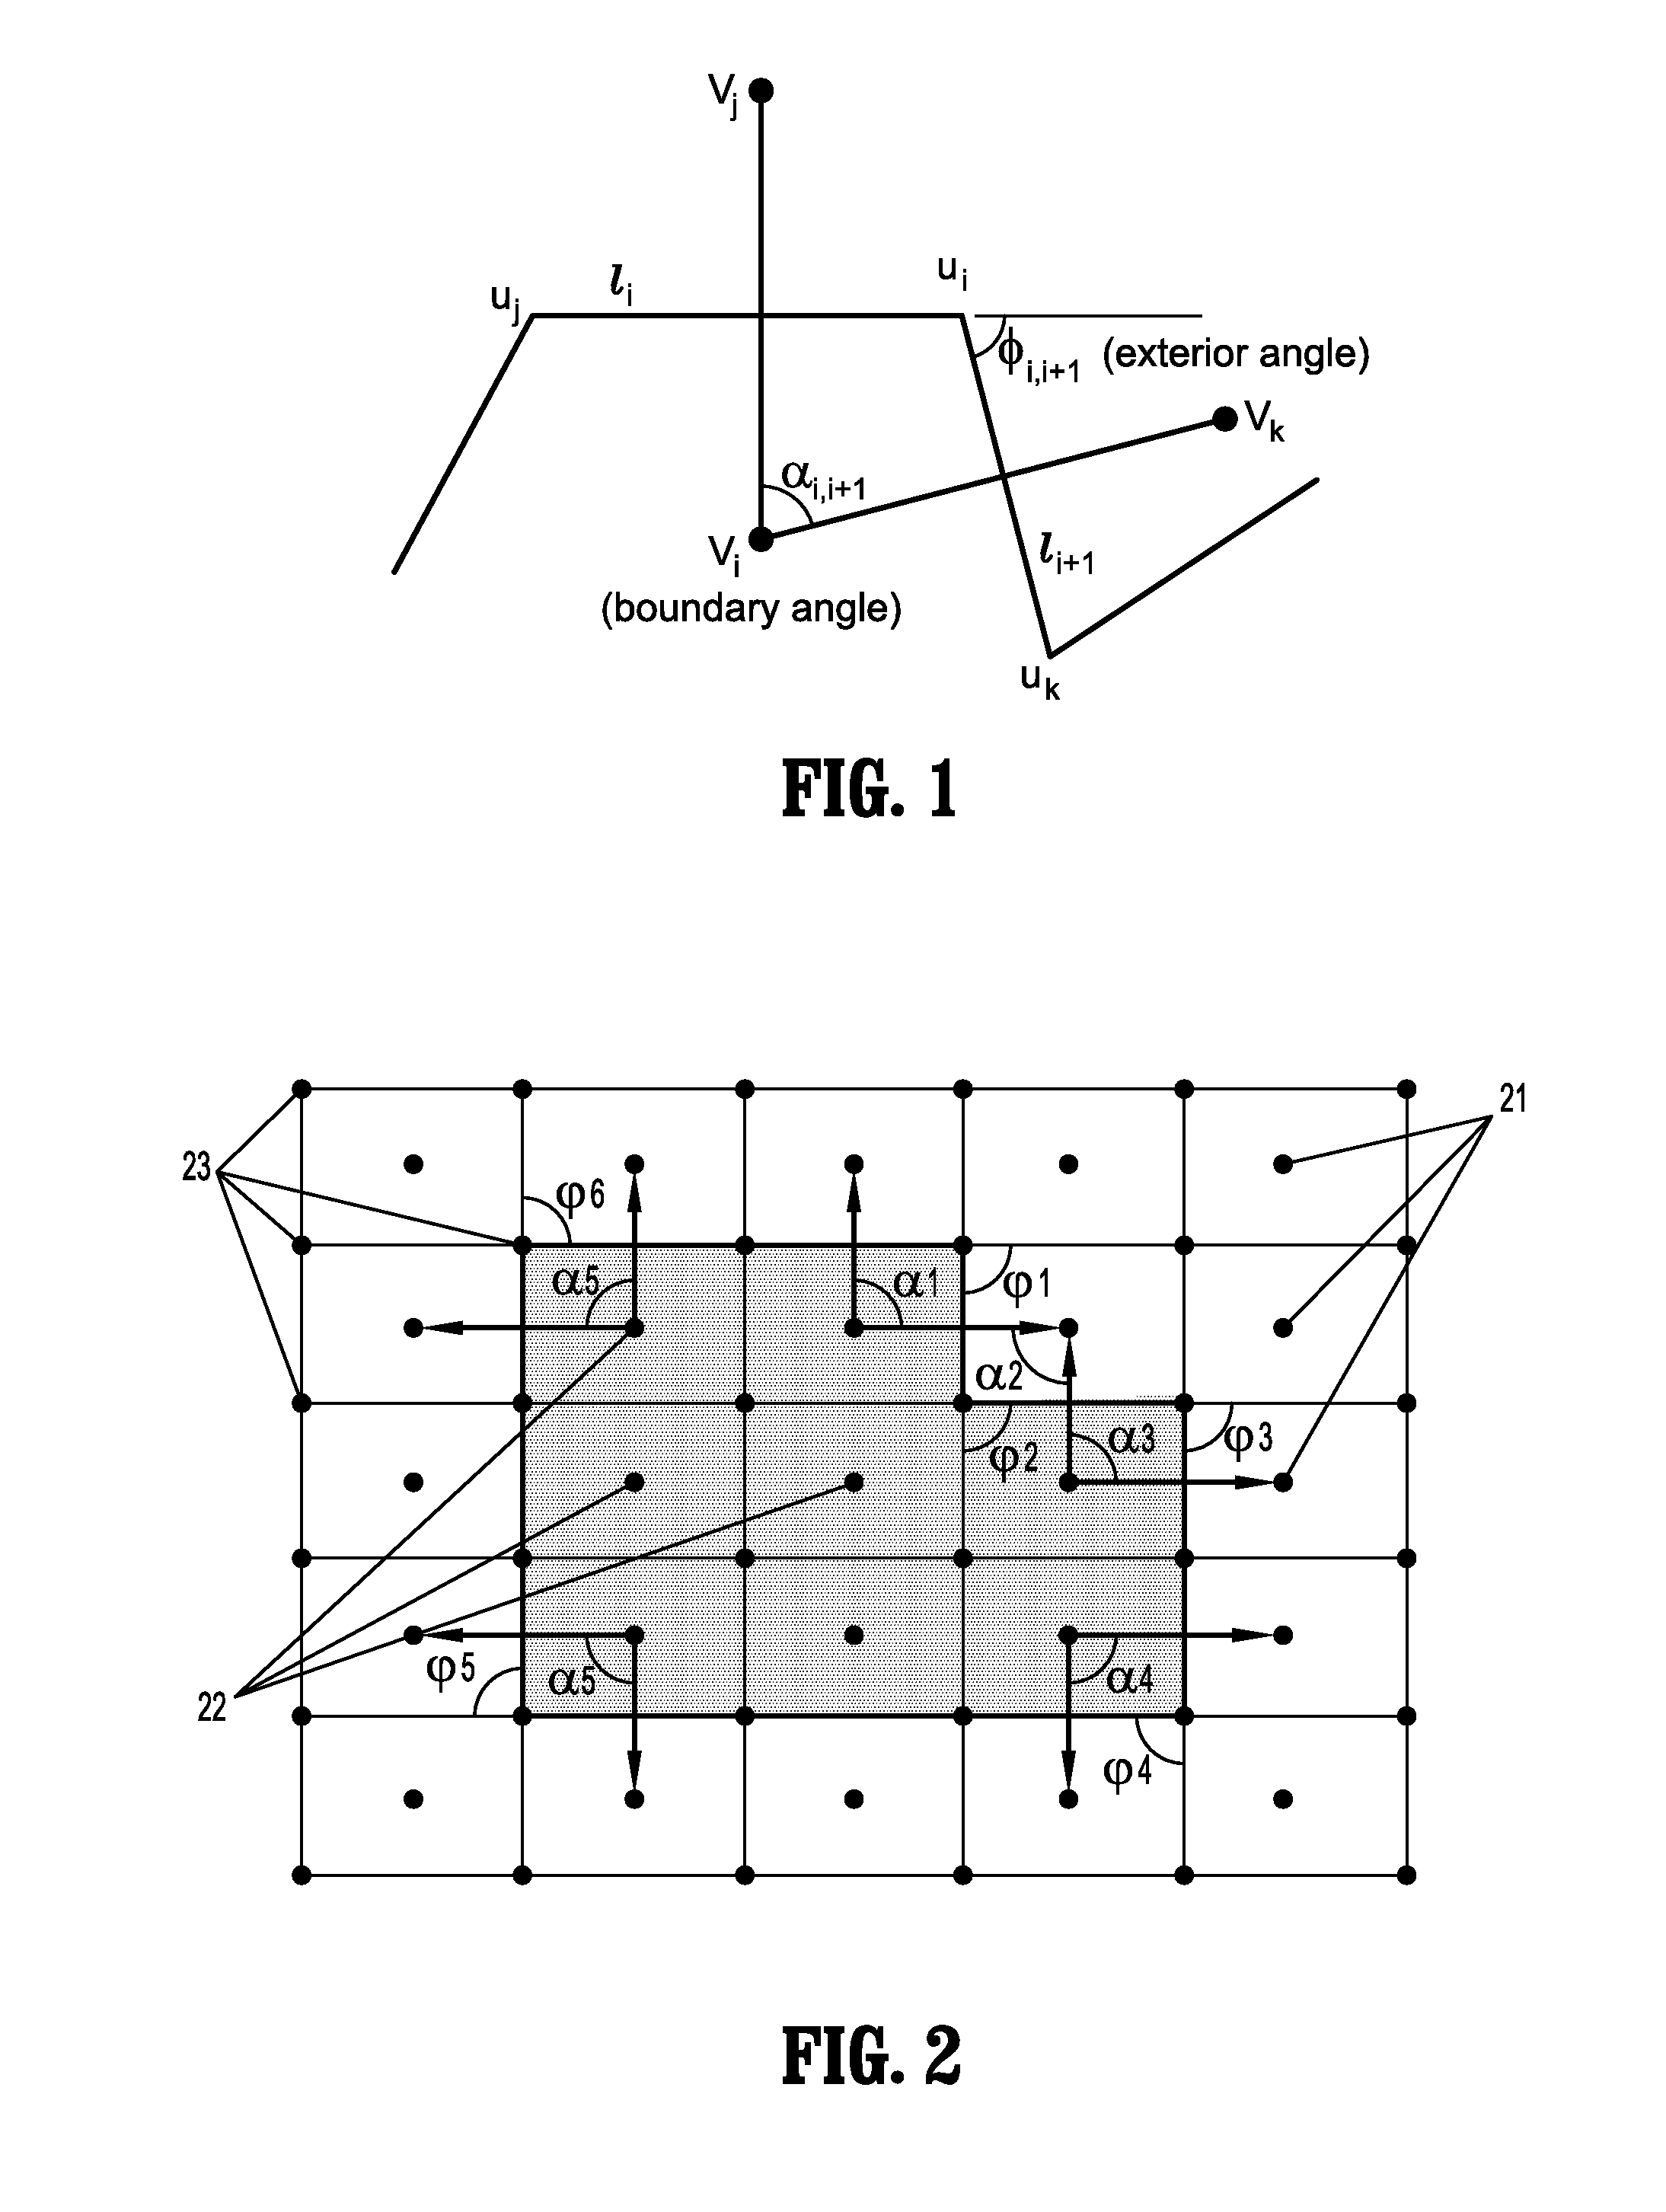 System and Method for Image Segmentation by Optimizing Weighted Curvature